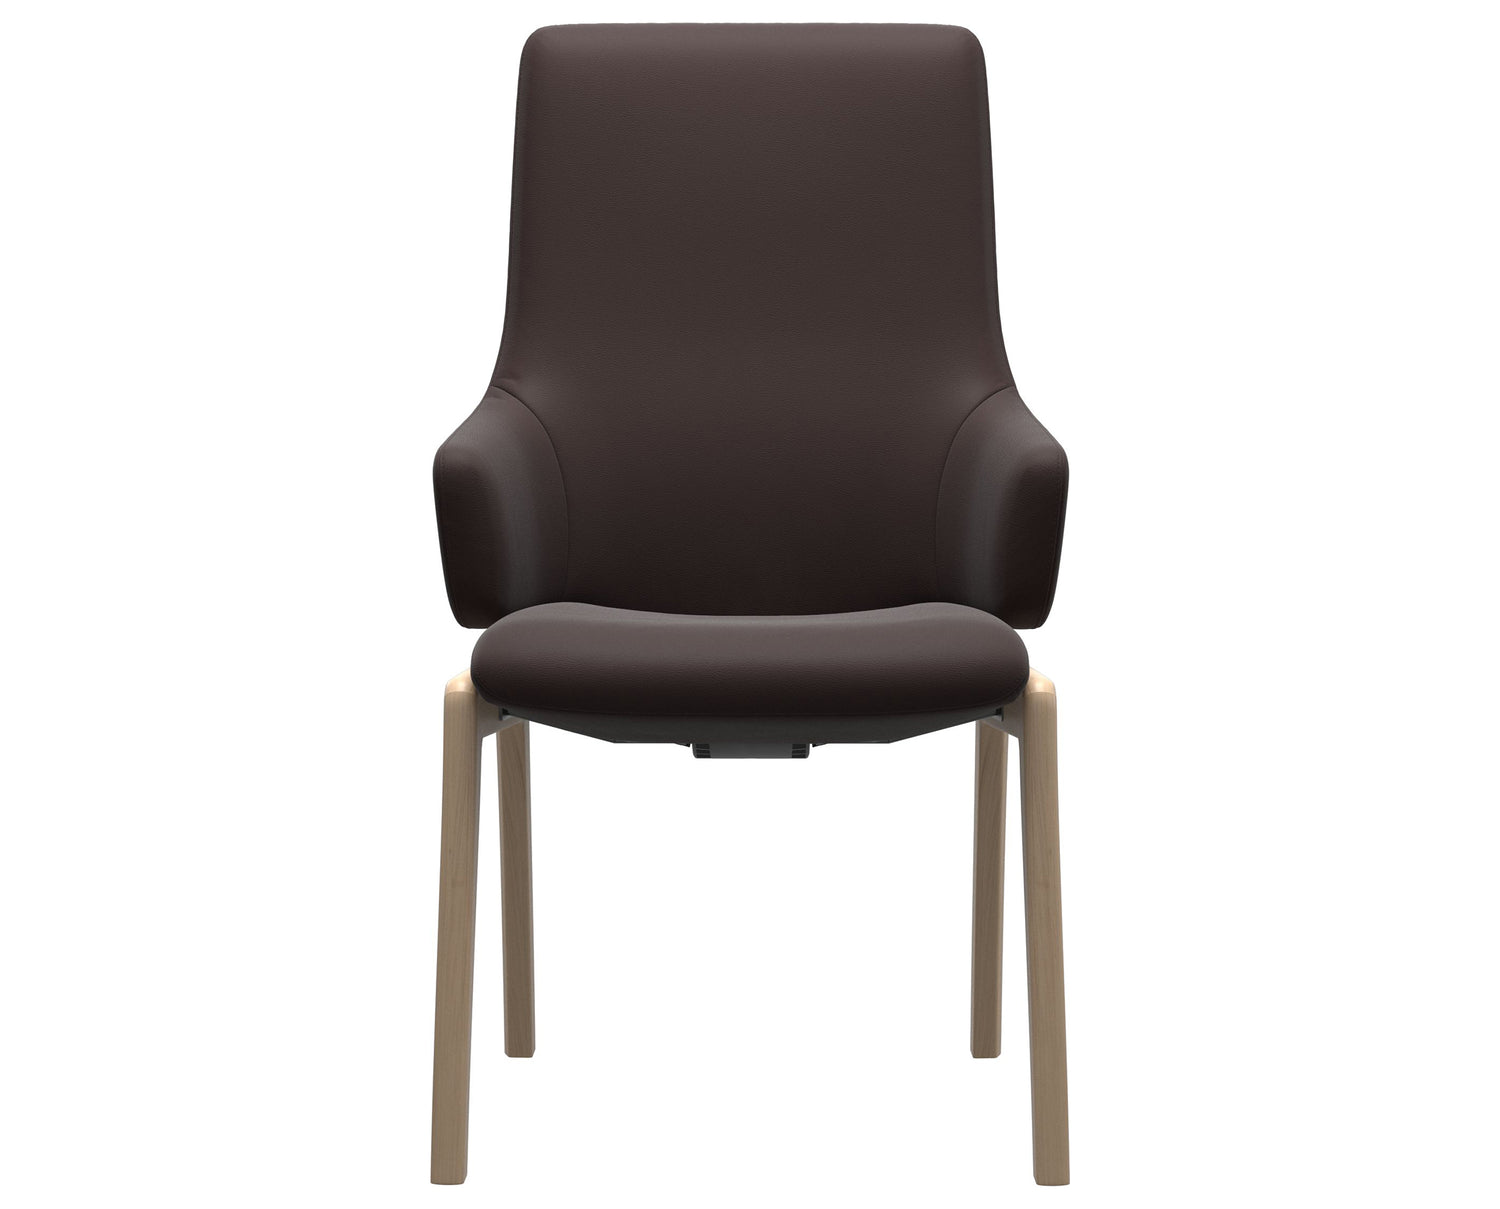 Paloma Leather Chocolate & Natural Base | Stressless Laurel High Back D100 Dining Chair w/Arms | Valley Ridge Furniture